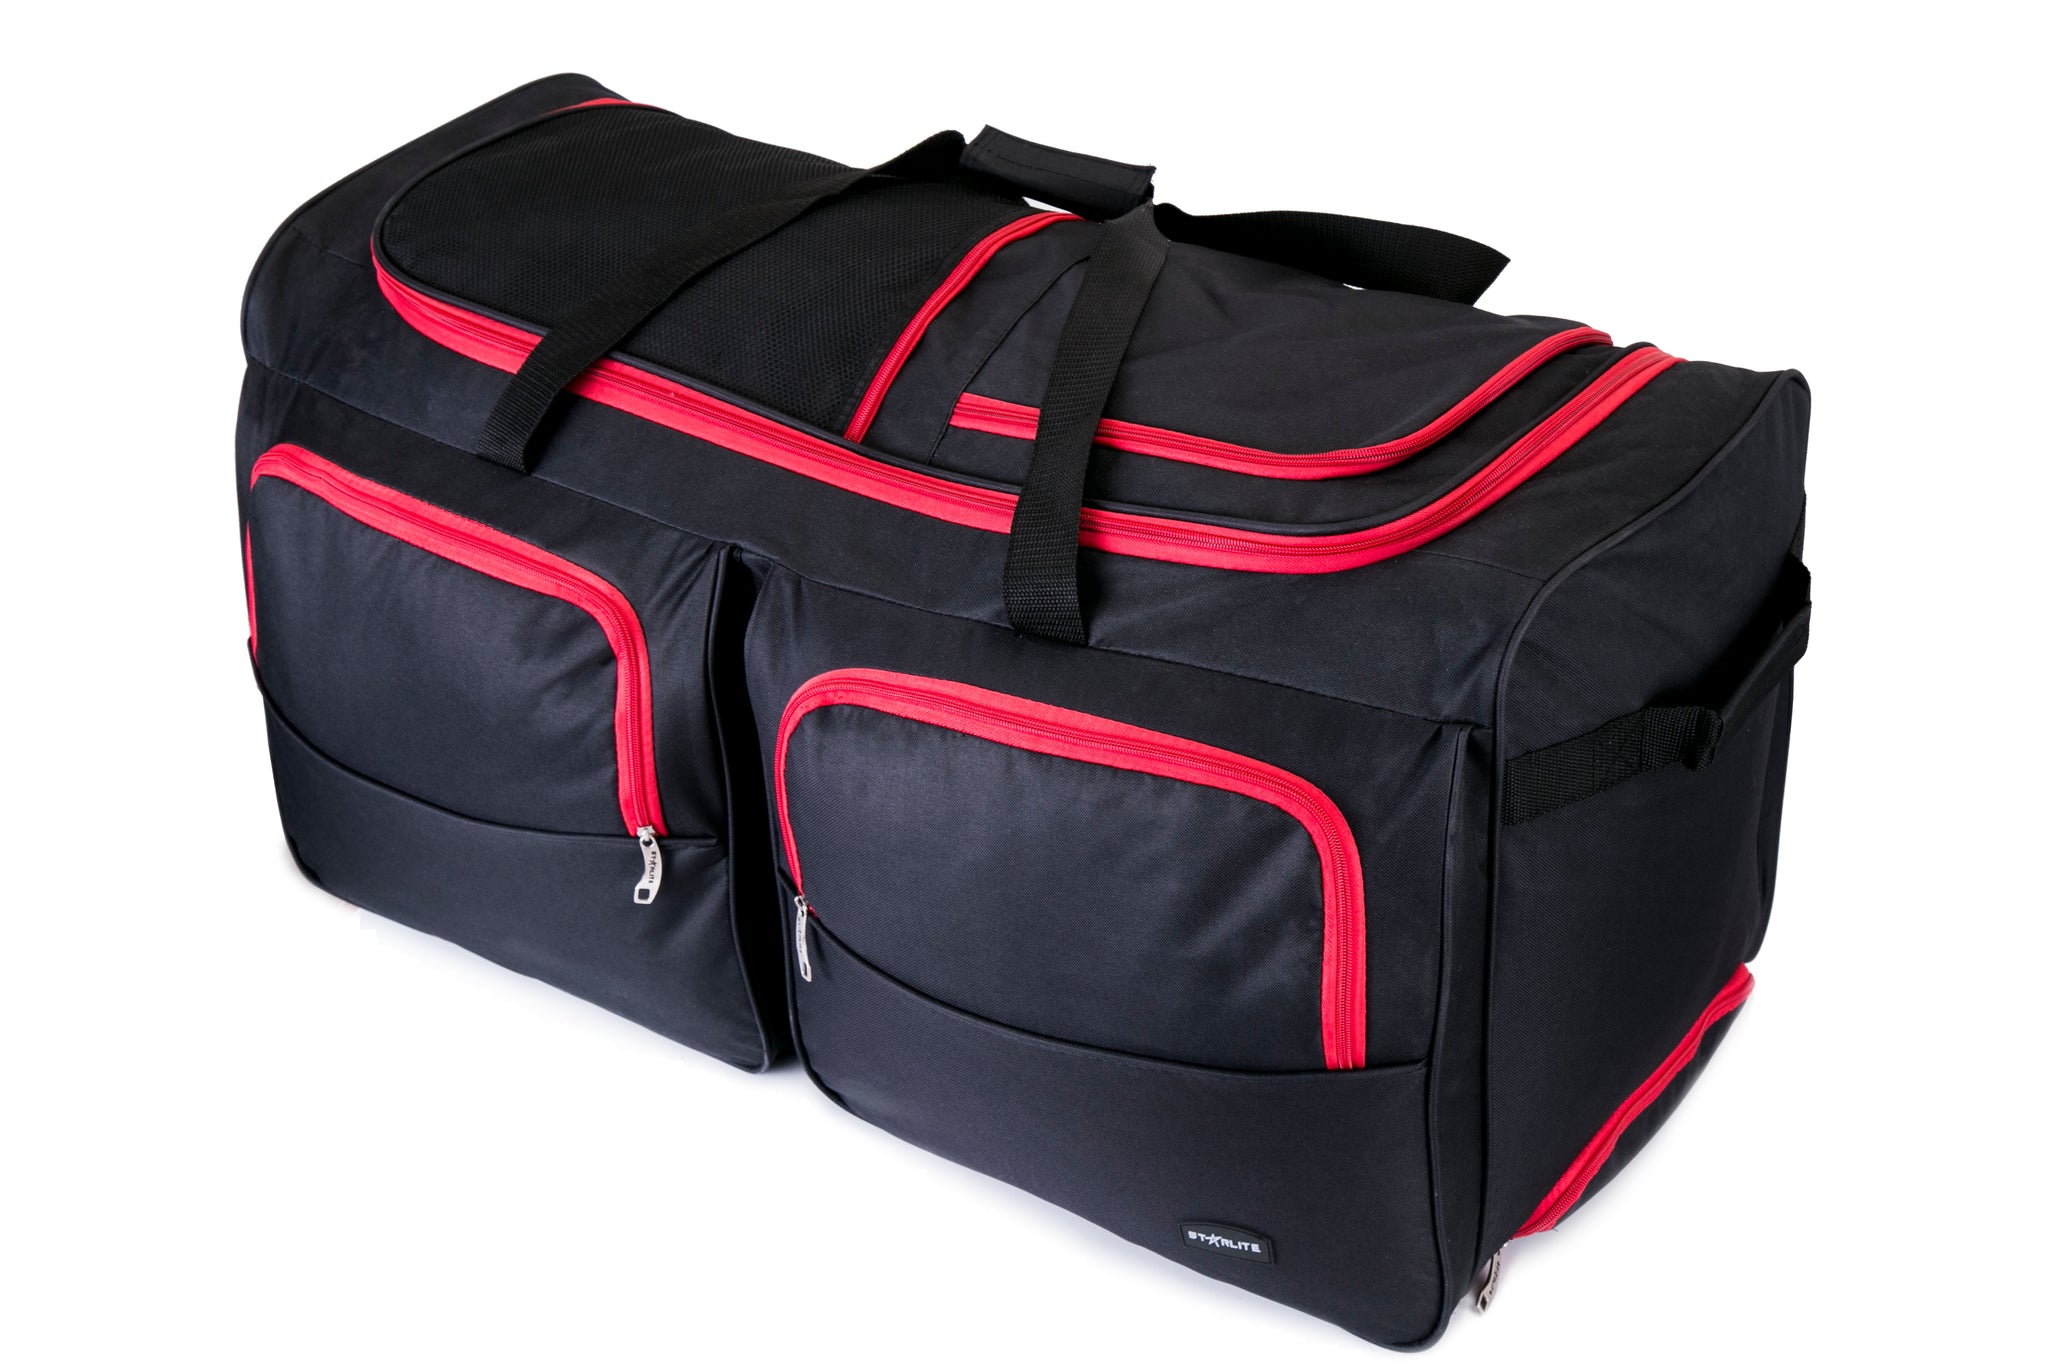 Buy Now XL Wheeled Holdall & Duffle Bags at DK LUGGAGE – DK Luggage